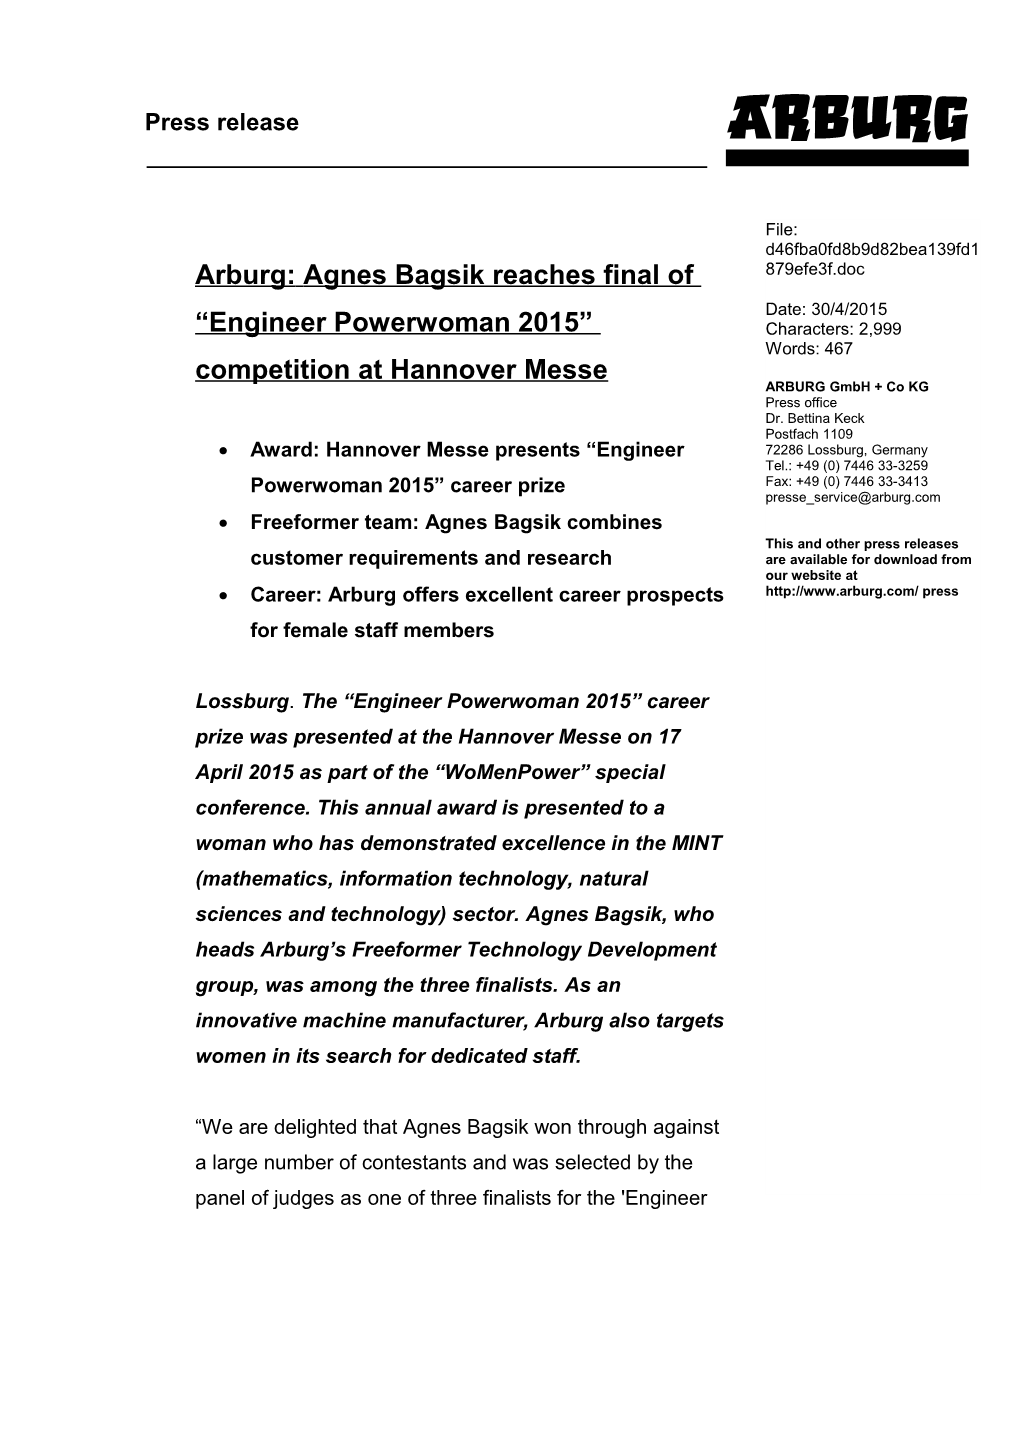 Arburg:Agnes Bagsik Reaches Final of Engineer Powerwoman 2015 Competition at Hannover Messe